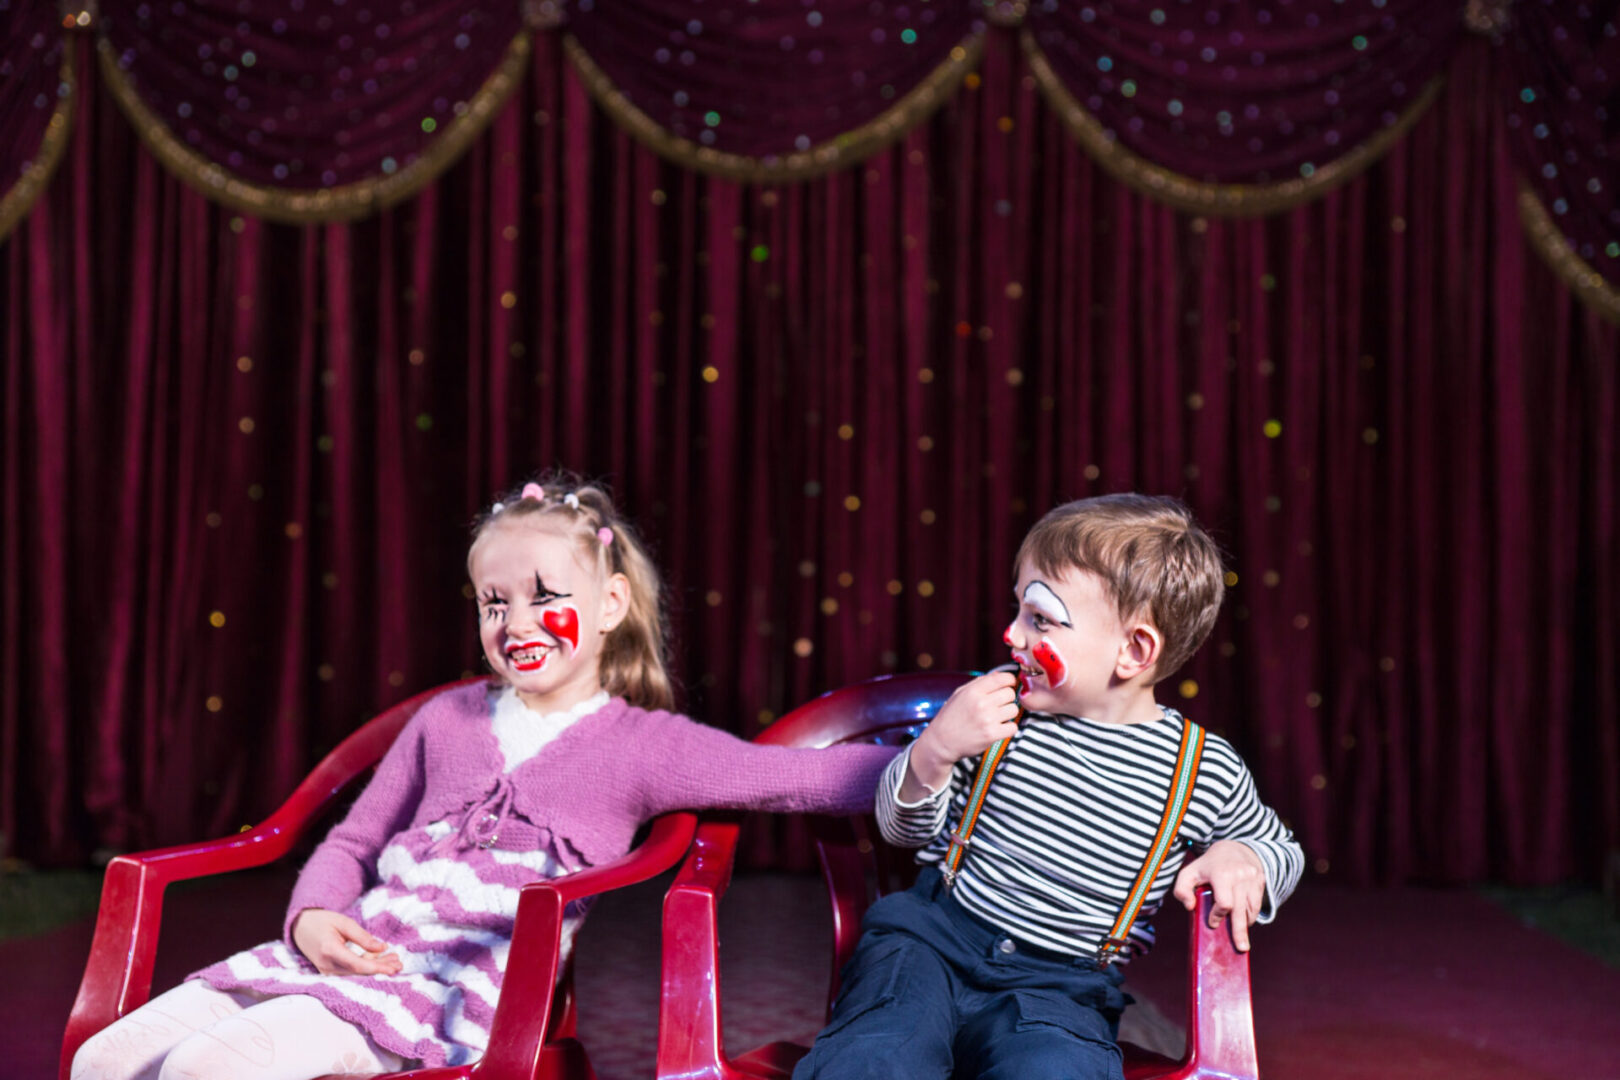 Girl and Boy Wearing Clown Make Up Laughing and Playing Together Sitting on Red Chairs on Empty Stage with Curtain in Background